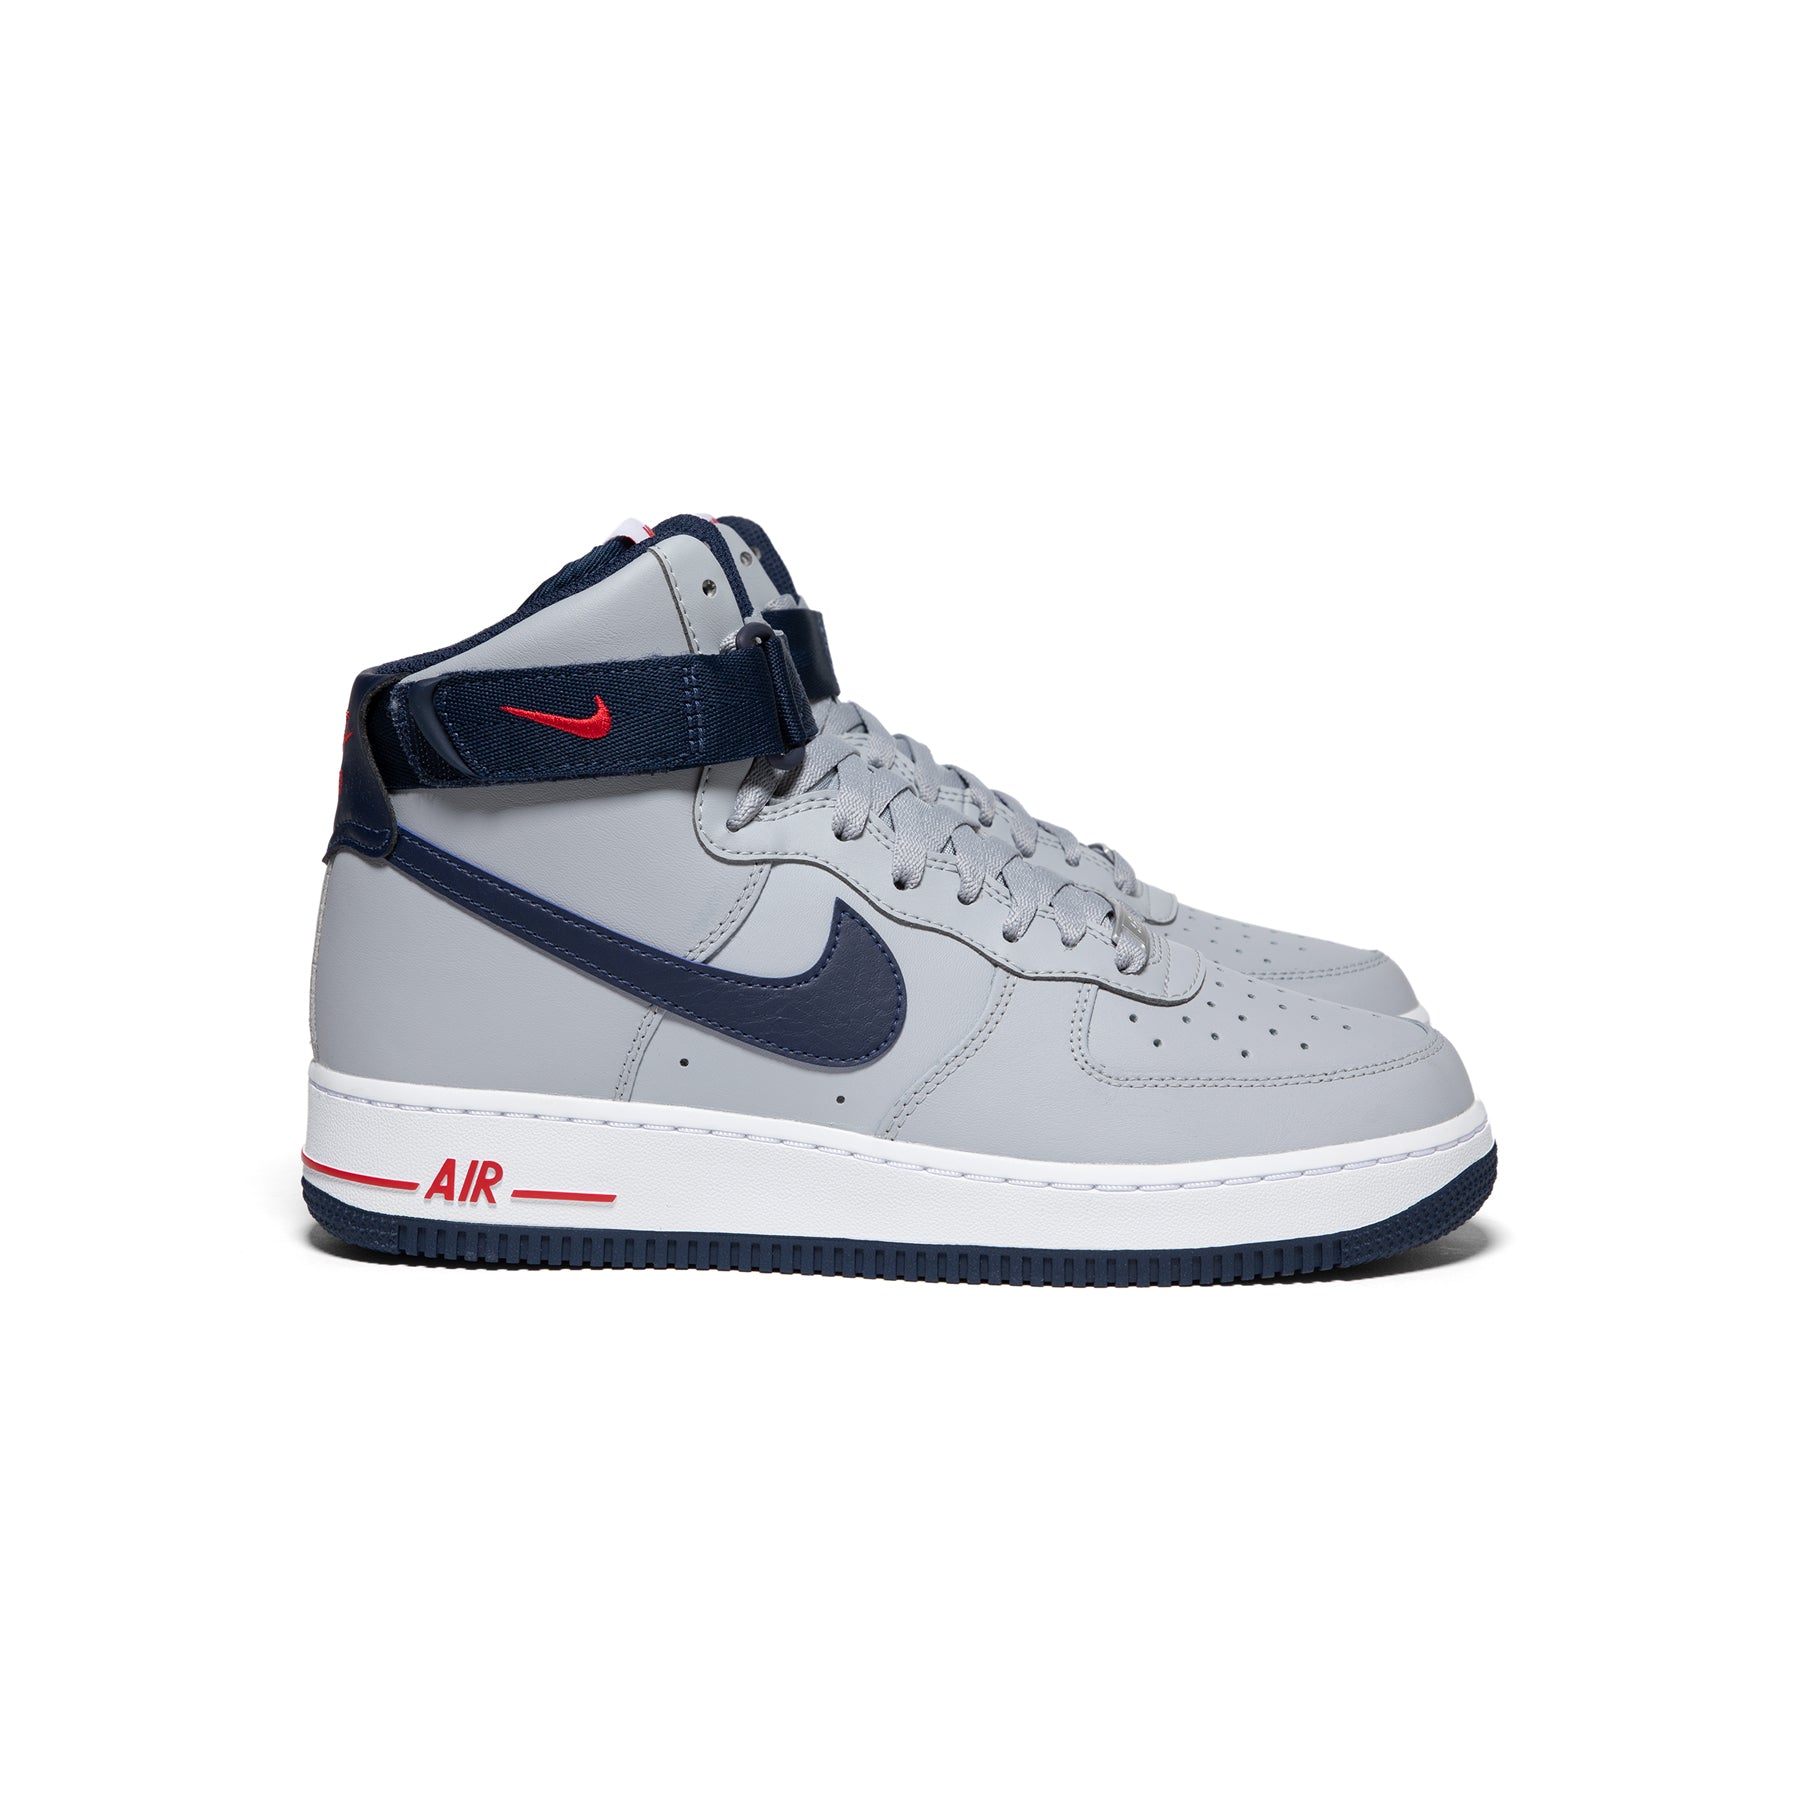 Nike Womens Air Force 1 High (Wolf Grey/College Navy/University Red) Concepts